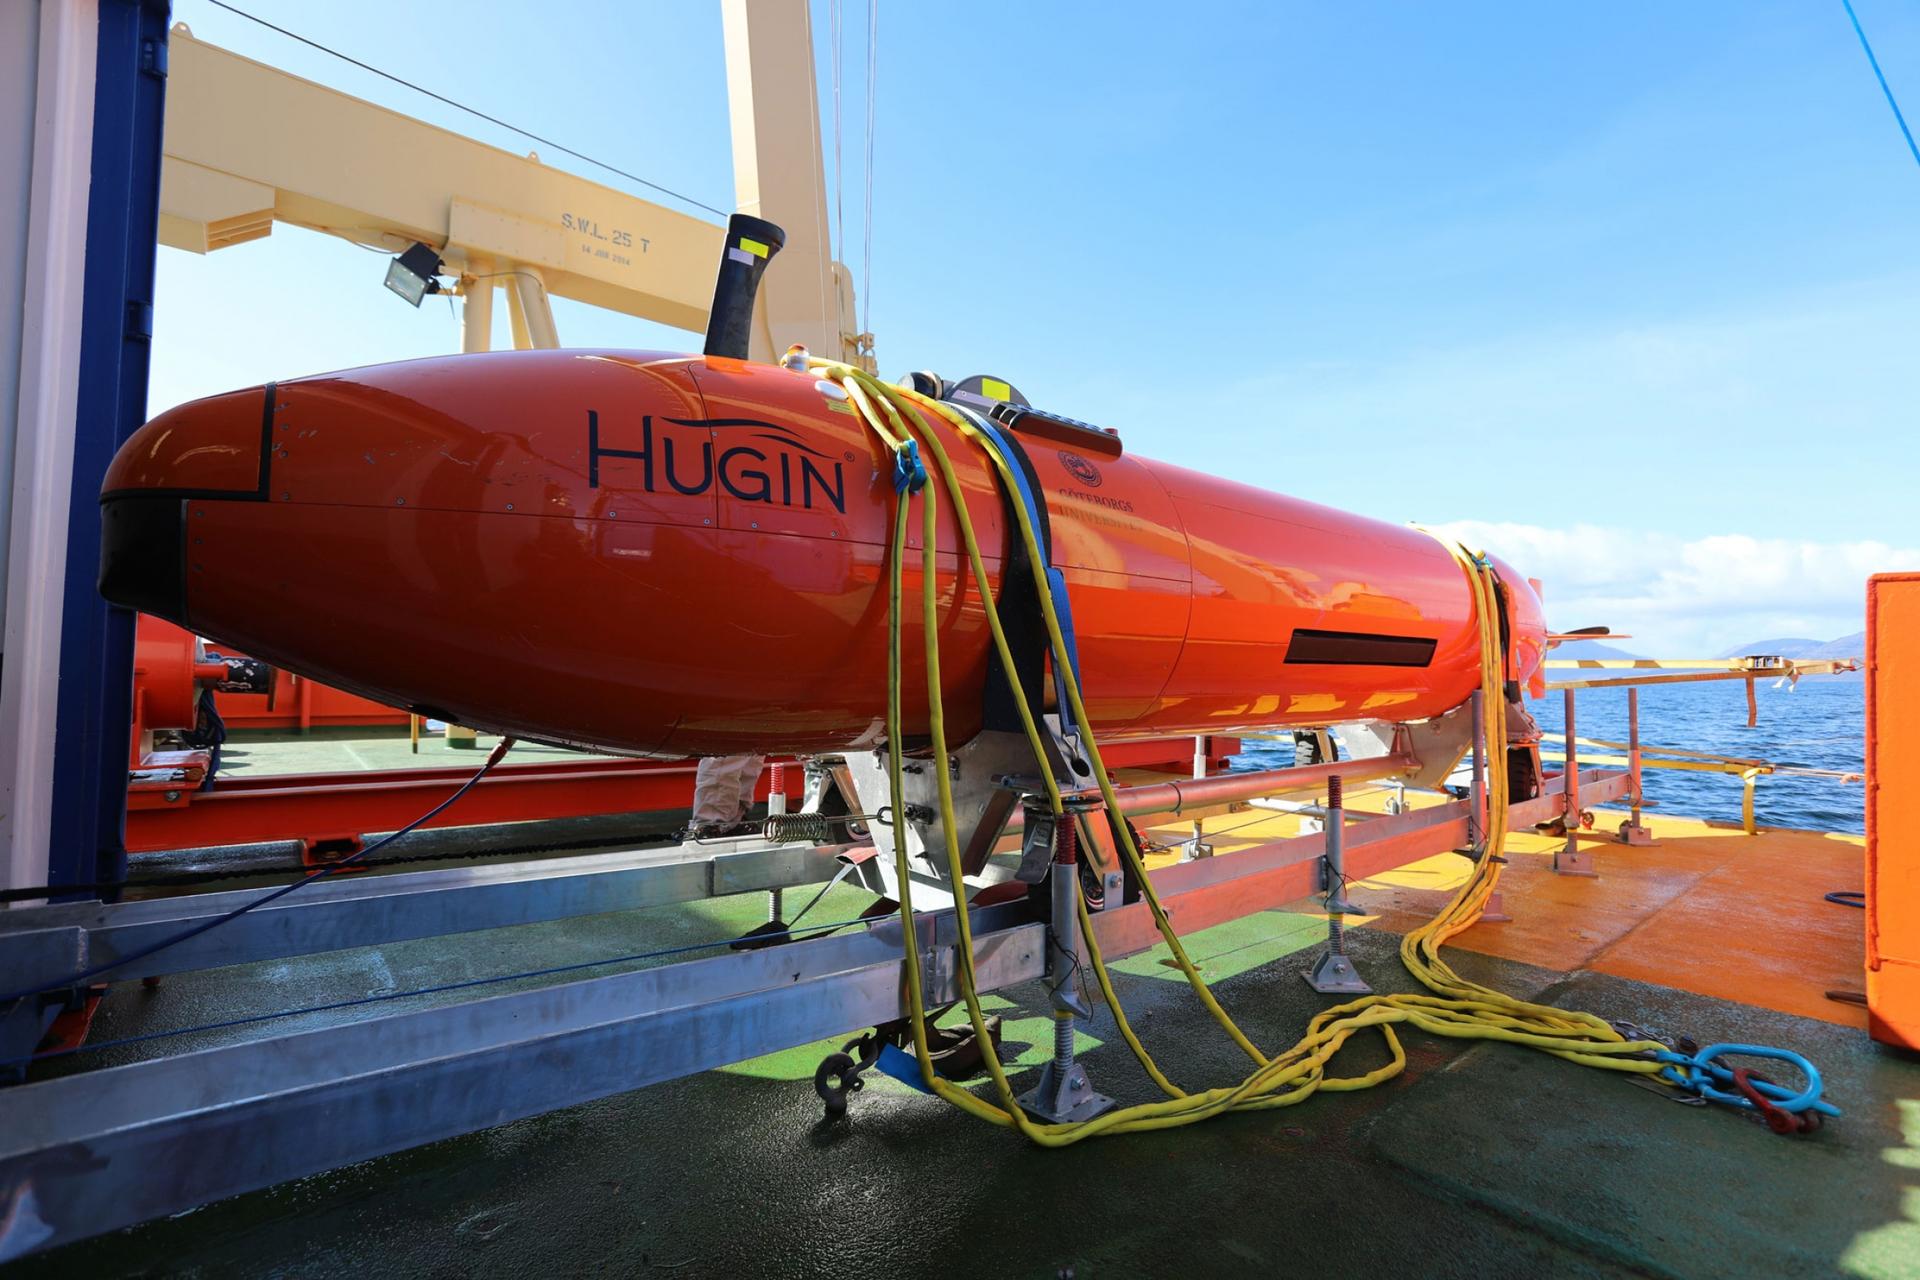 The Hugin, a long orange metal submarine is shown on the deck of the ship.